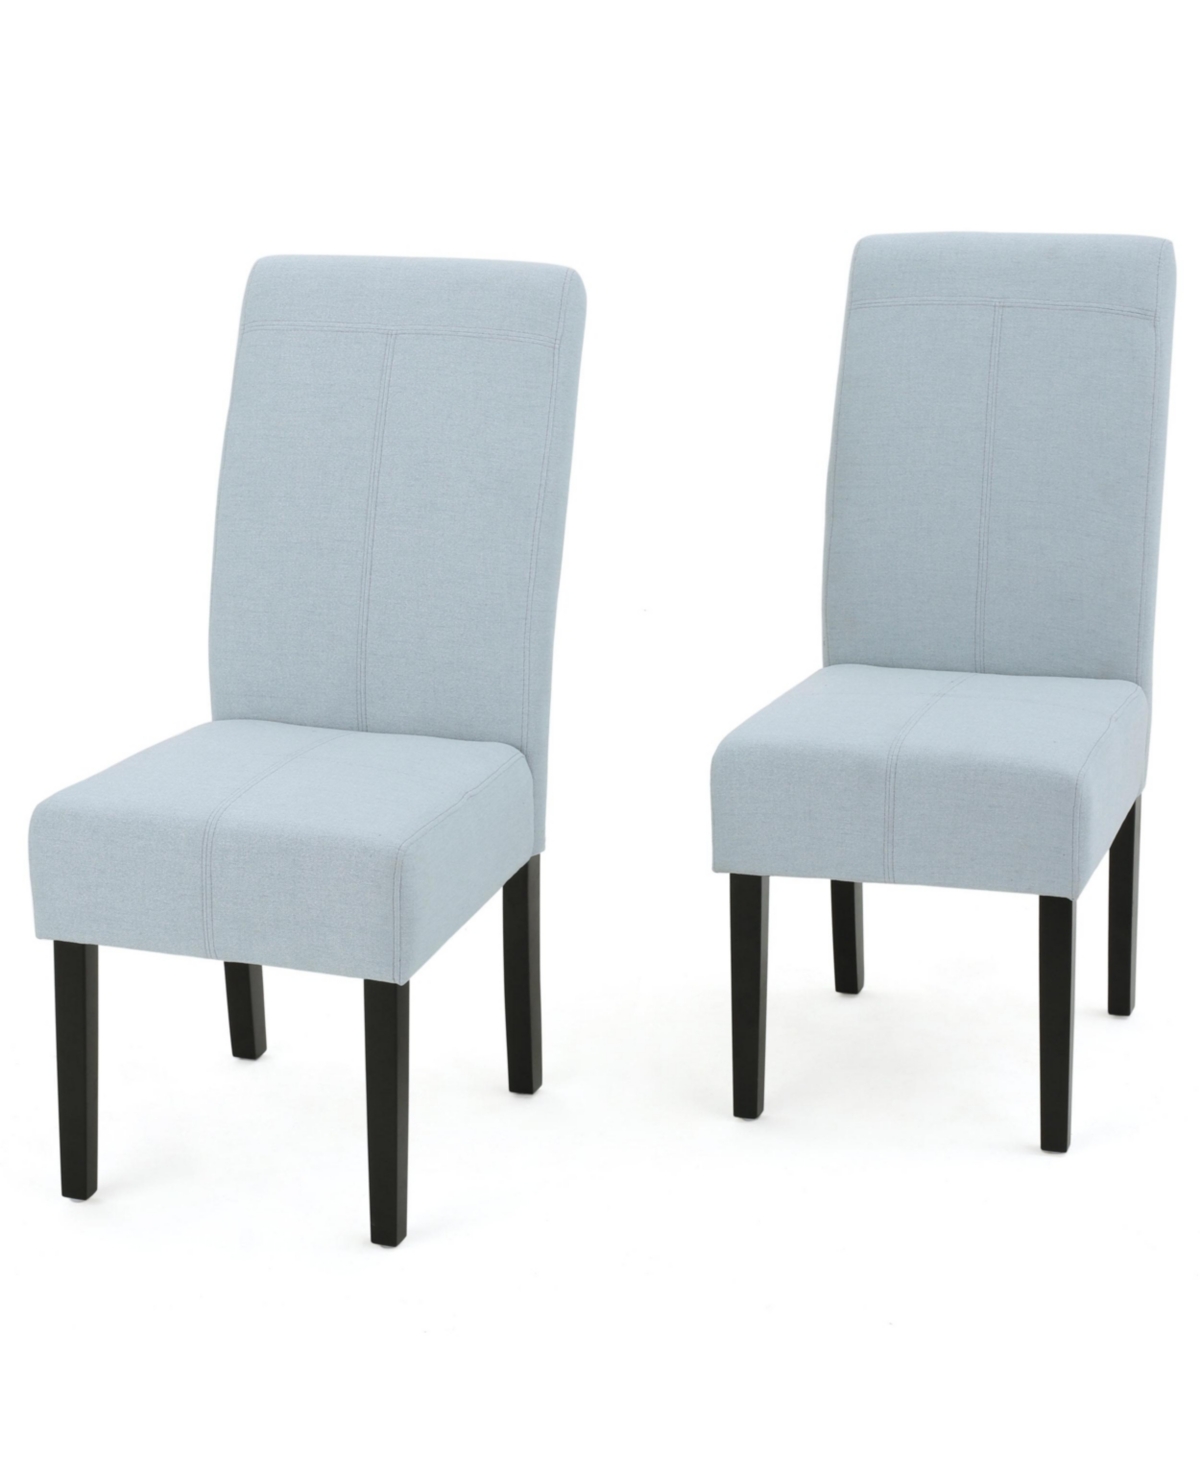 Noble House Pertica Light Sky Dining Chairs Set, 2 Piece